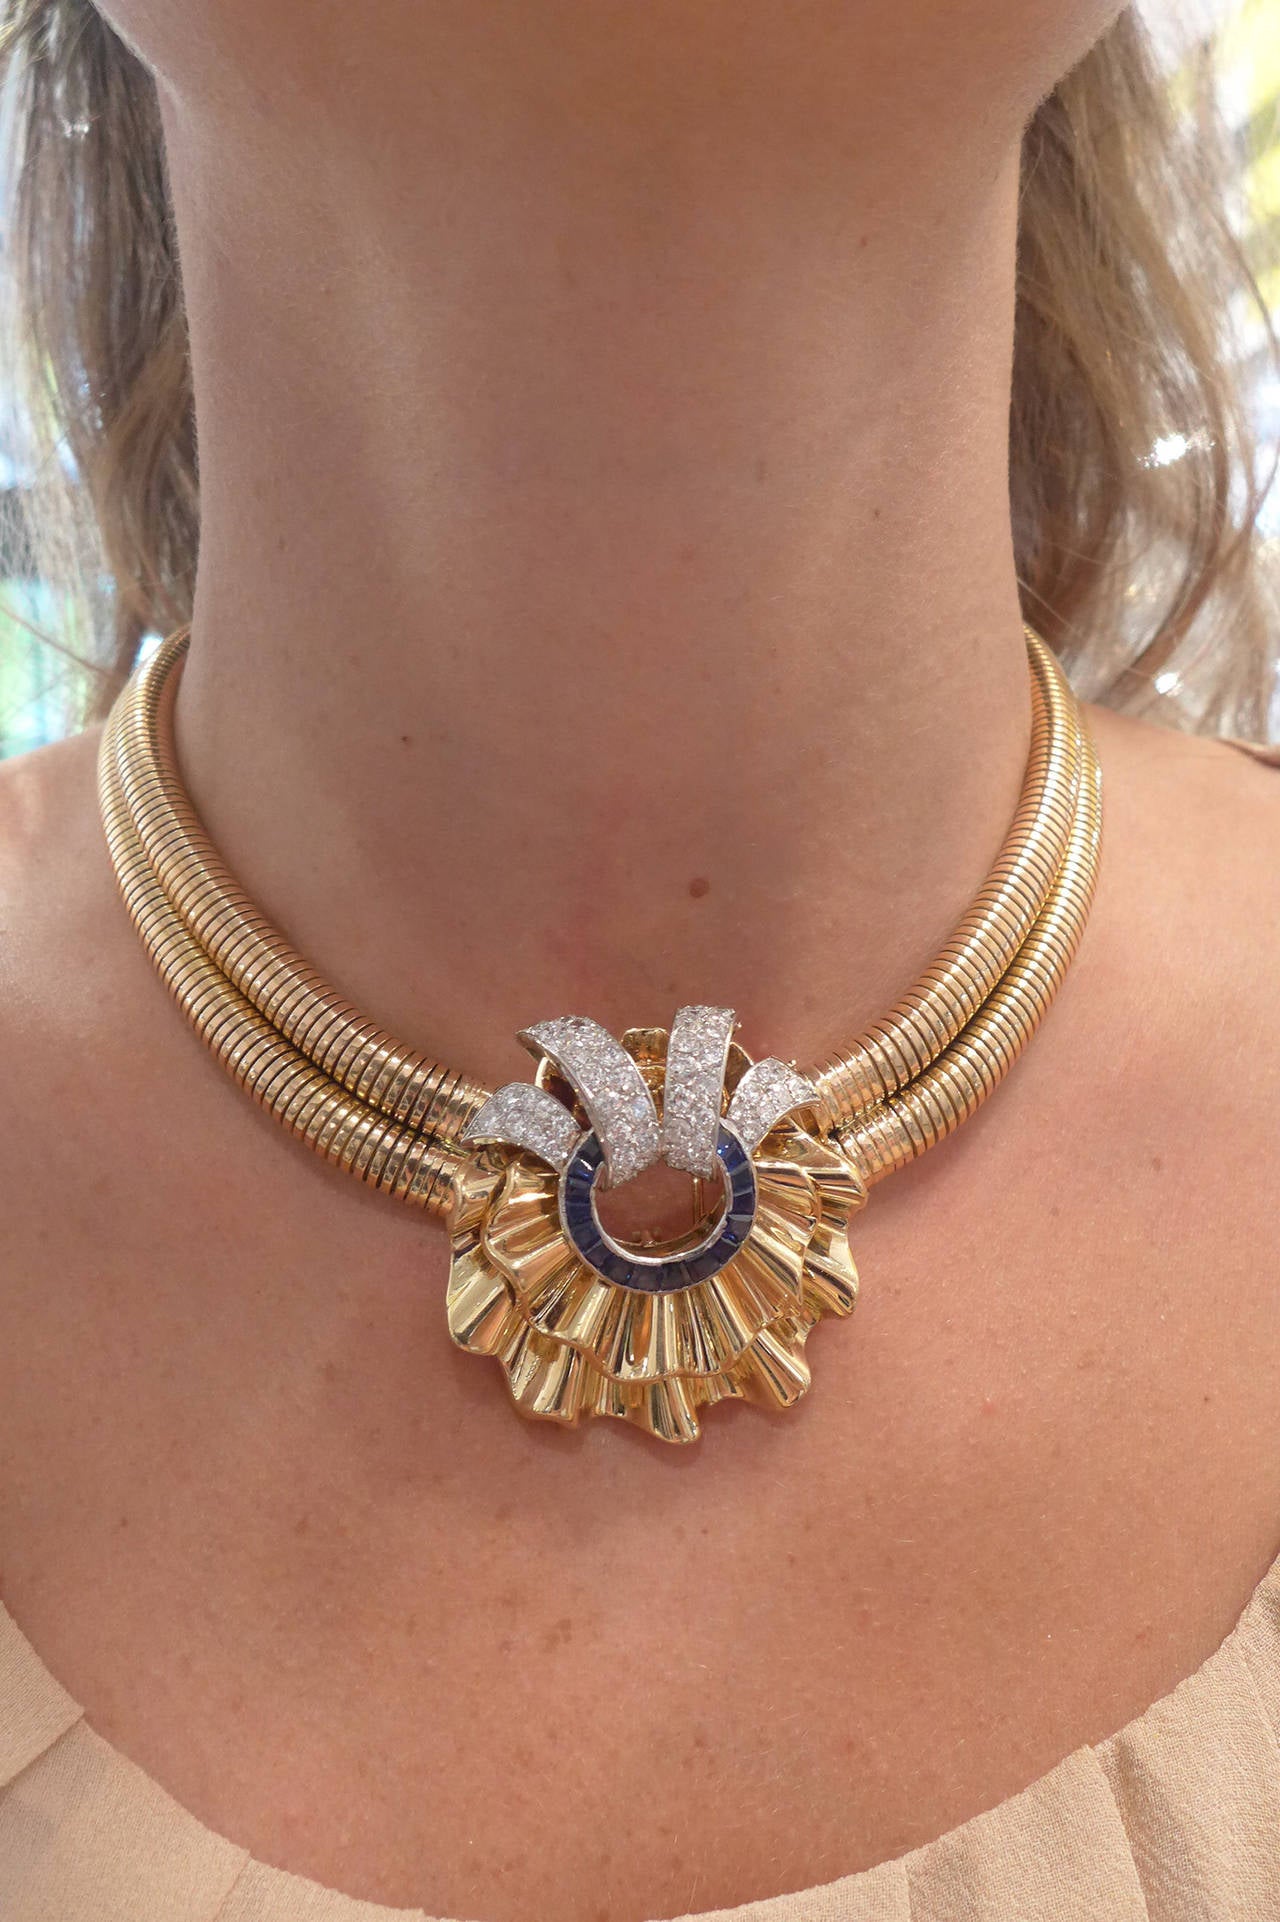 A spectacular yellowish-pink gold necklace made with two 